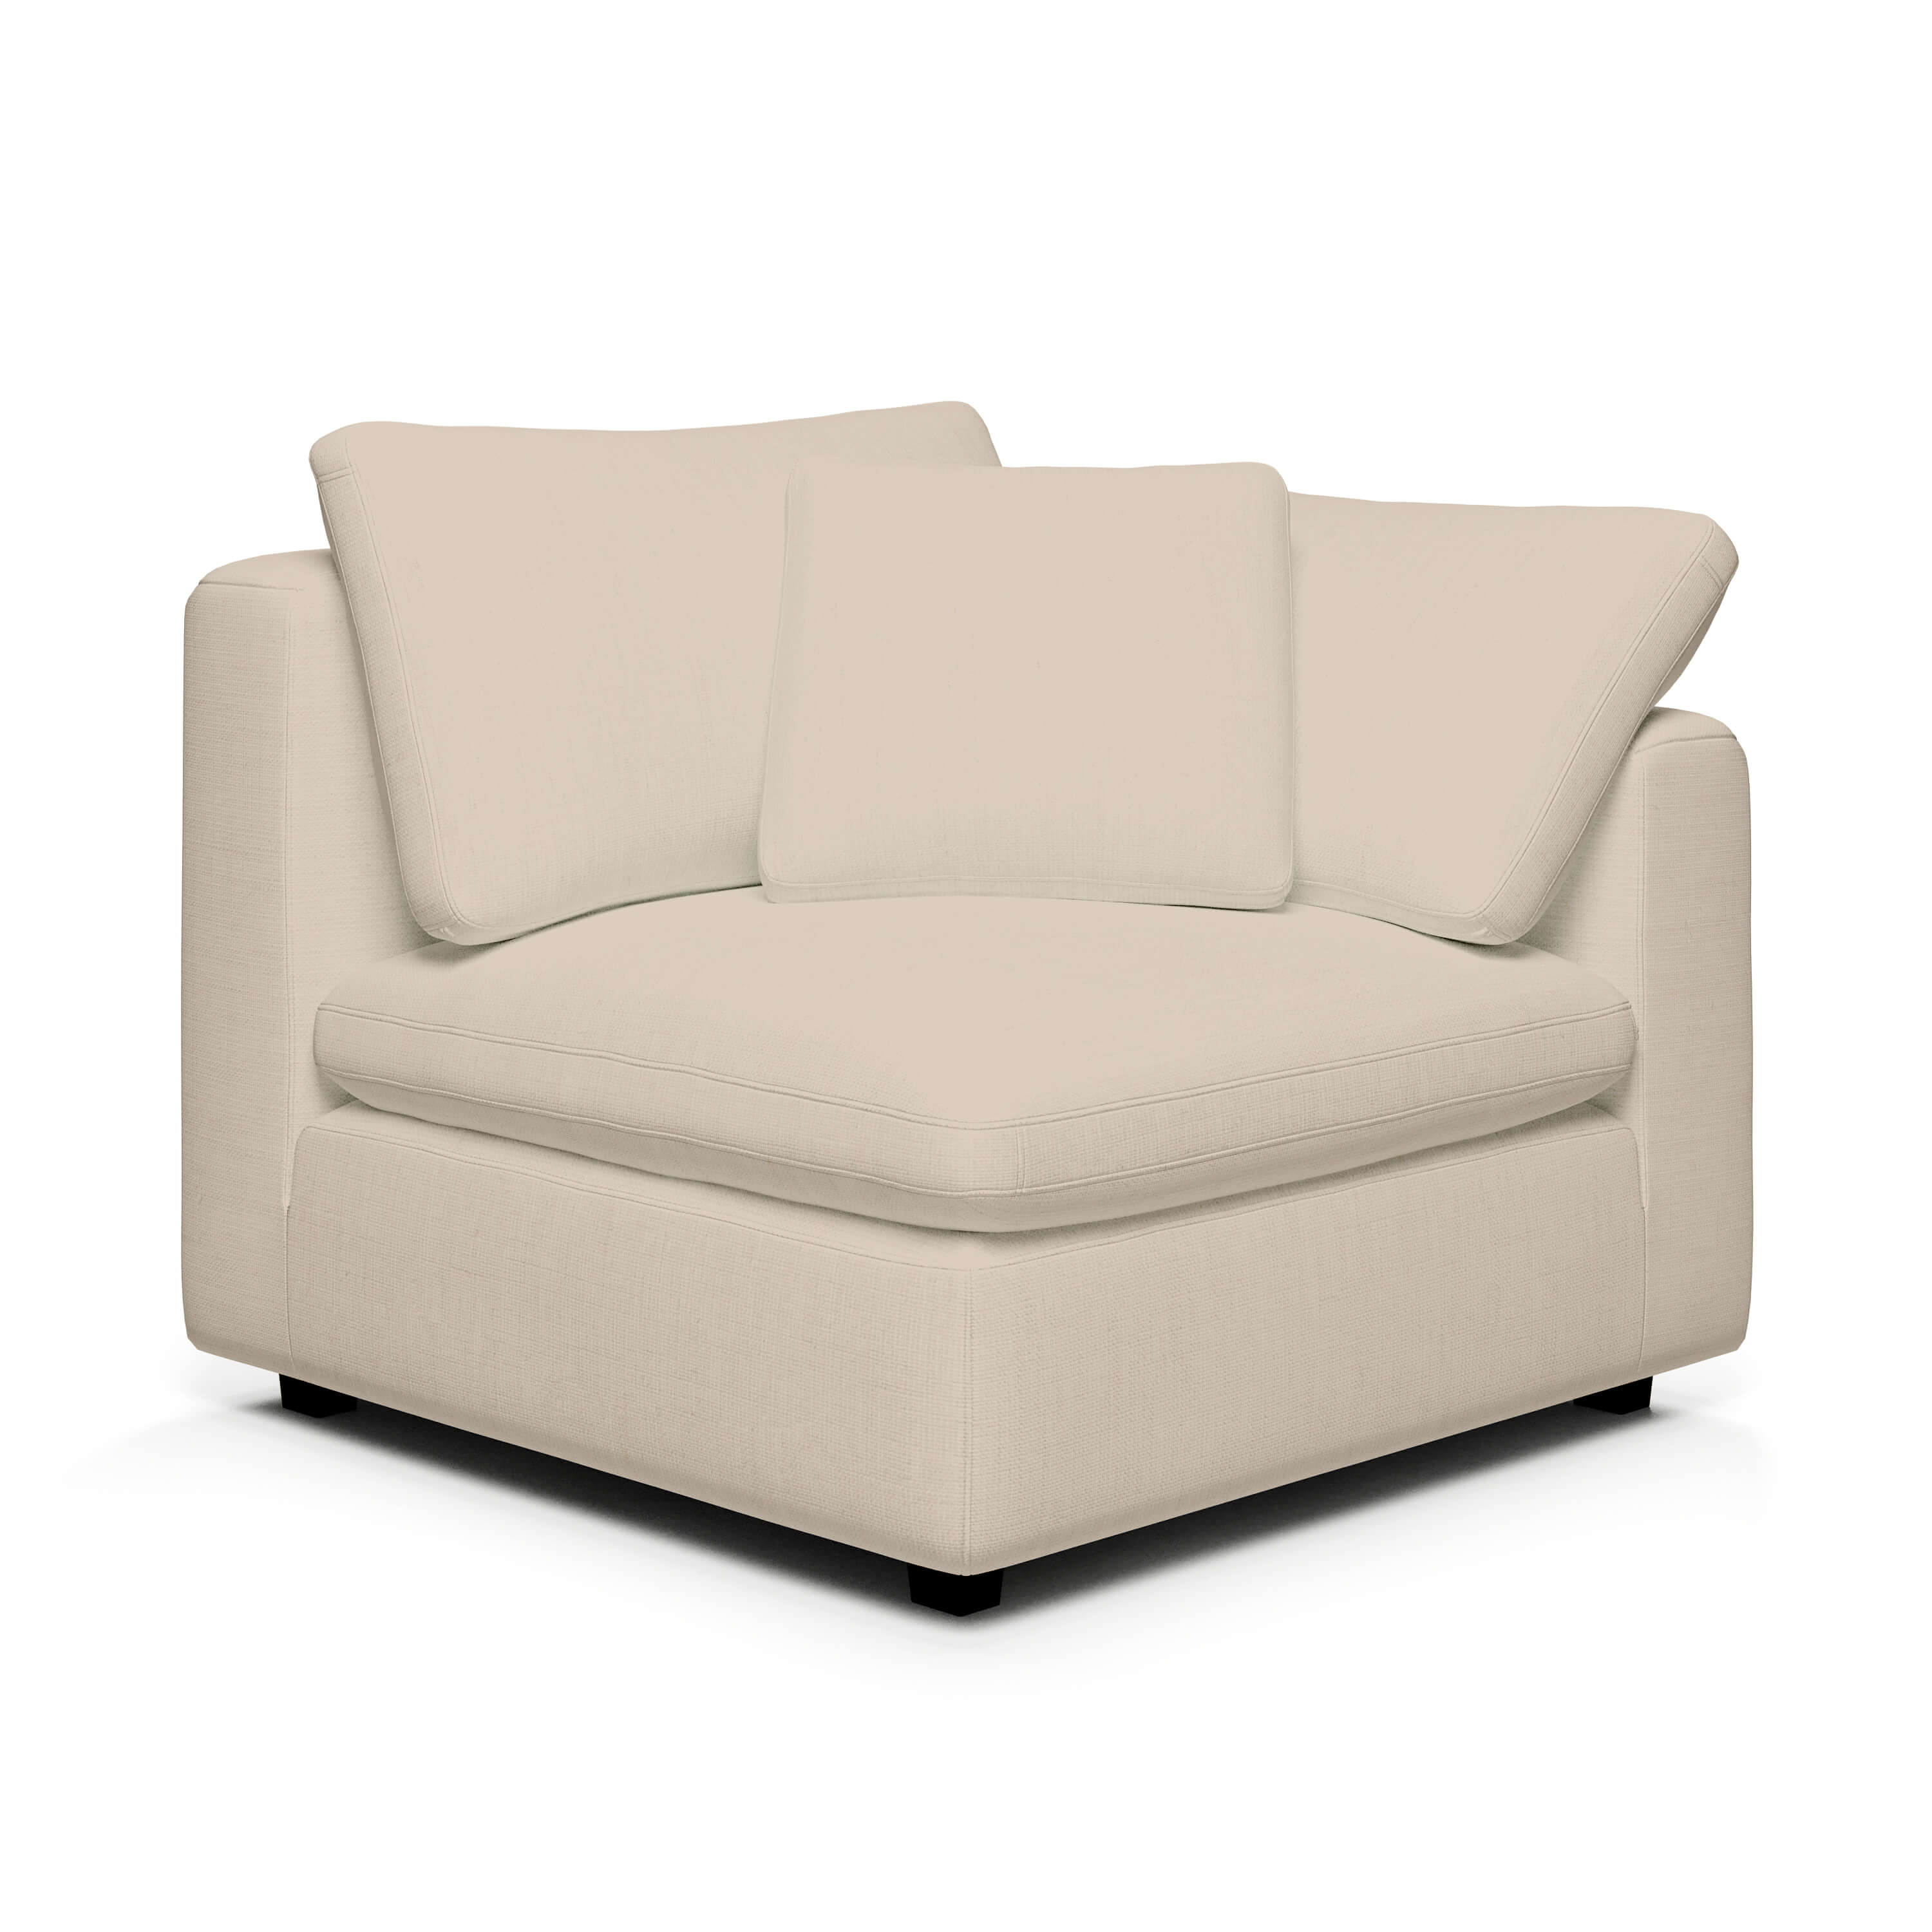 Comfy Corner Chair for Bedroom | Corner Chair | Couch Haus